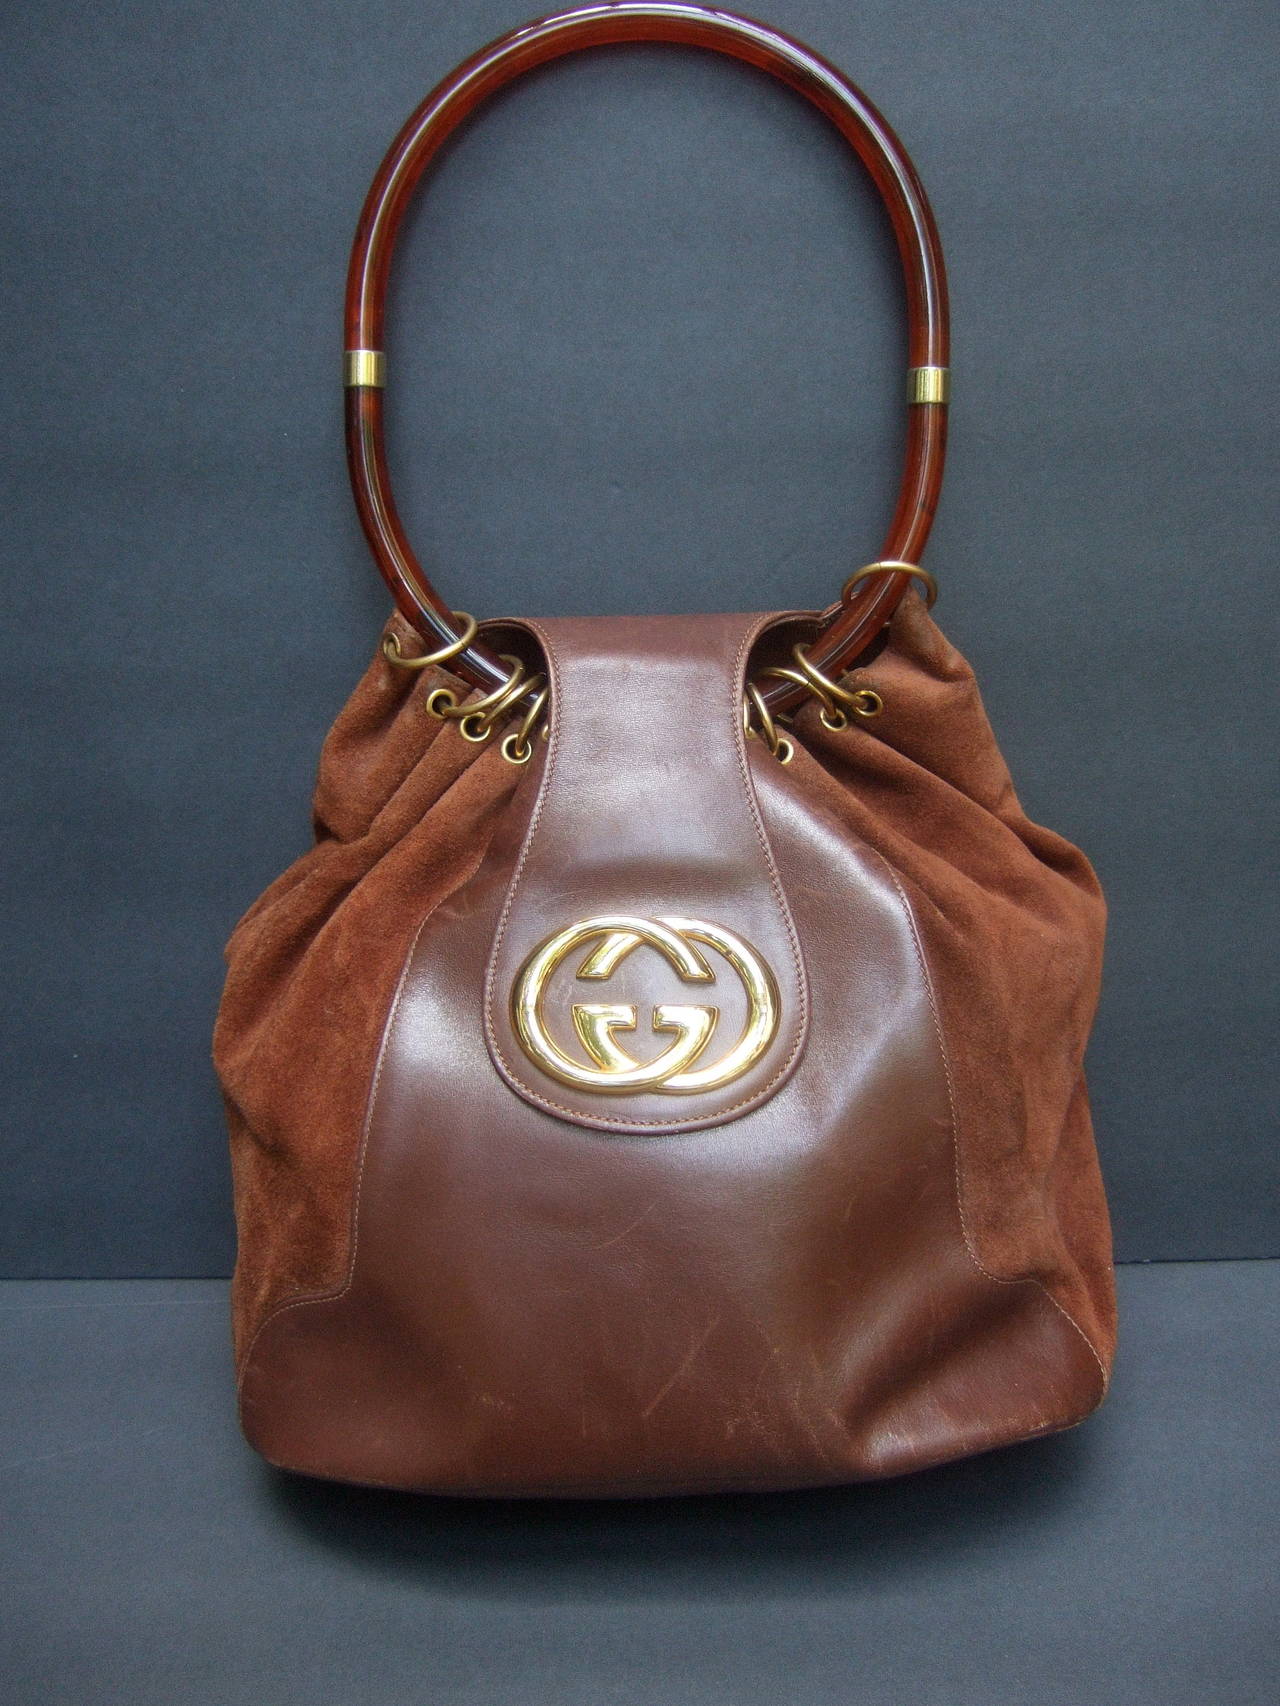 Gucci Italy Rare Brown leather & suede handbag c 1970
The stylish Italian handbag is carried with a sleek amber
tortoise shell lucite oval shaped handle 

The front exterior is adorned with Gucci's large
gilt metal interlocked initials. The